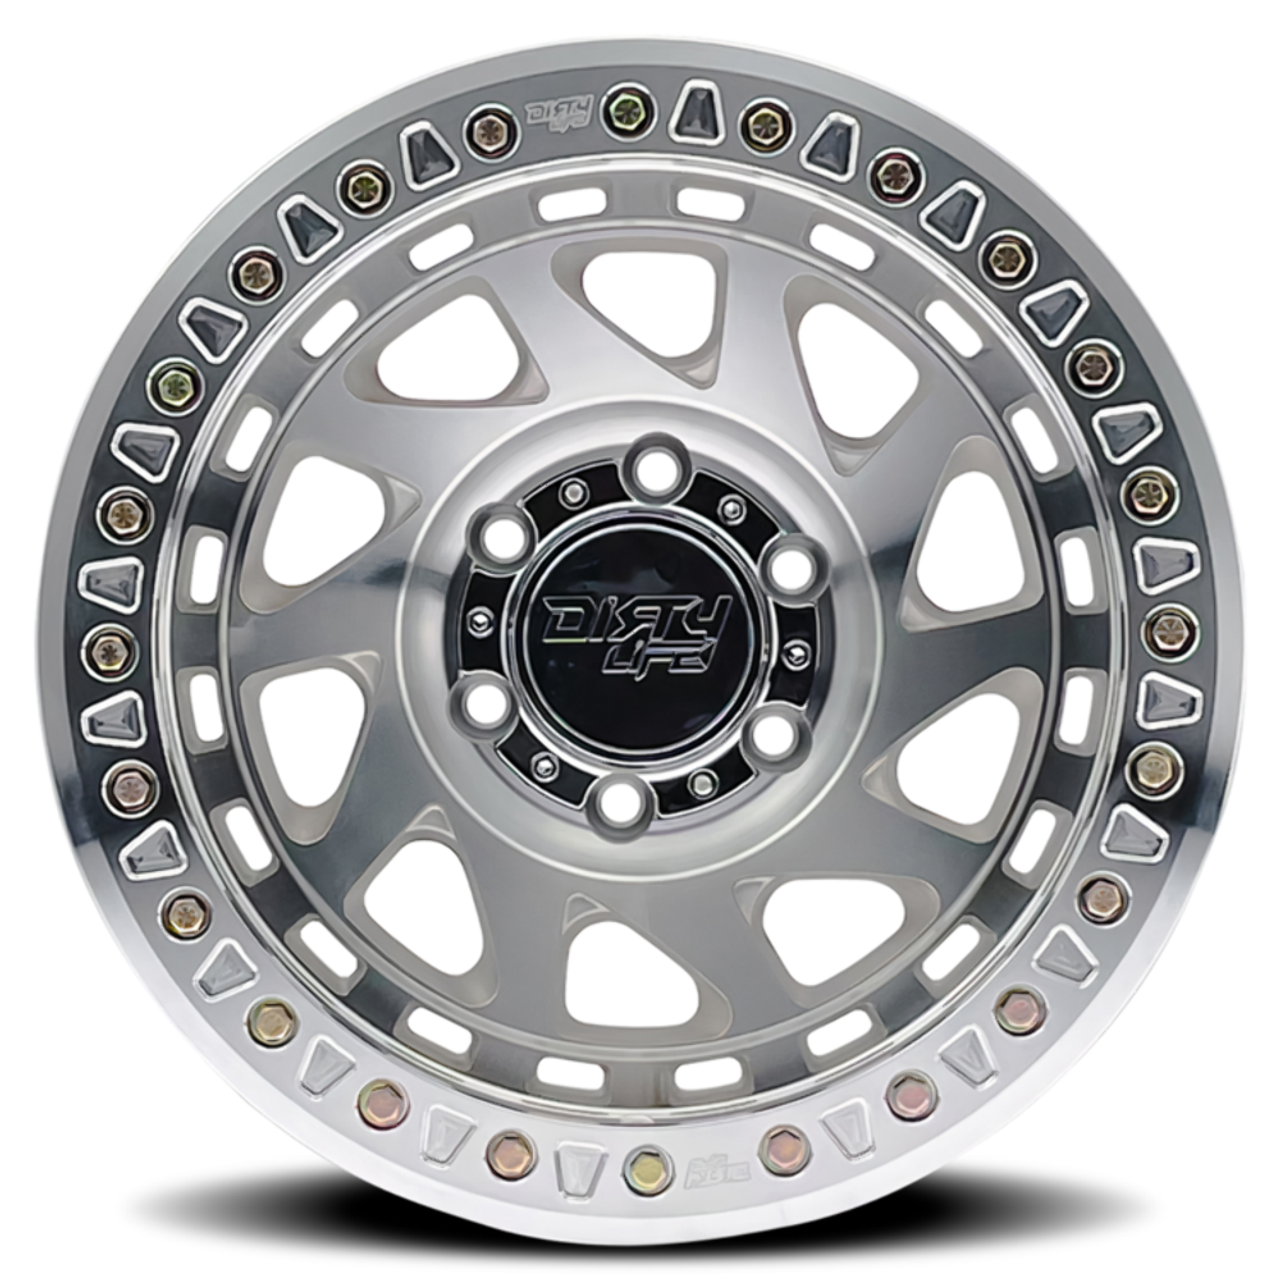 17" Dirty Life Enigma Race 17x9 Machined 6x135 Wheel -38mm For Ford Lincoln Rim